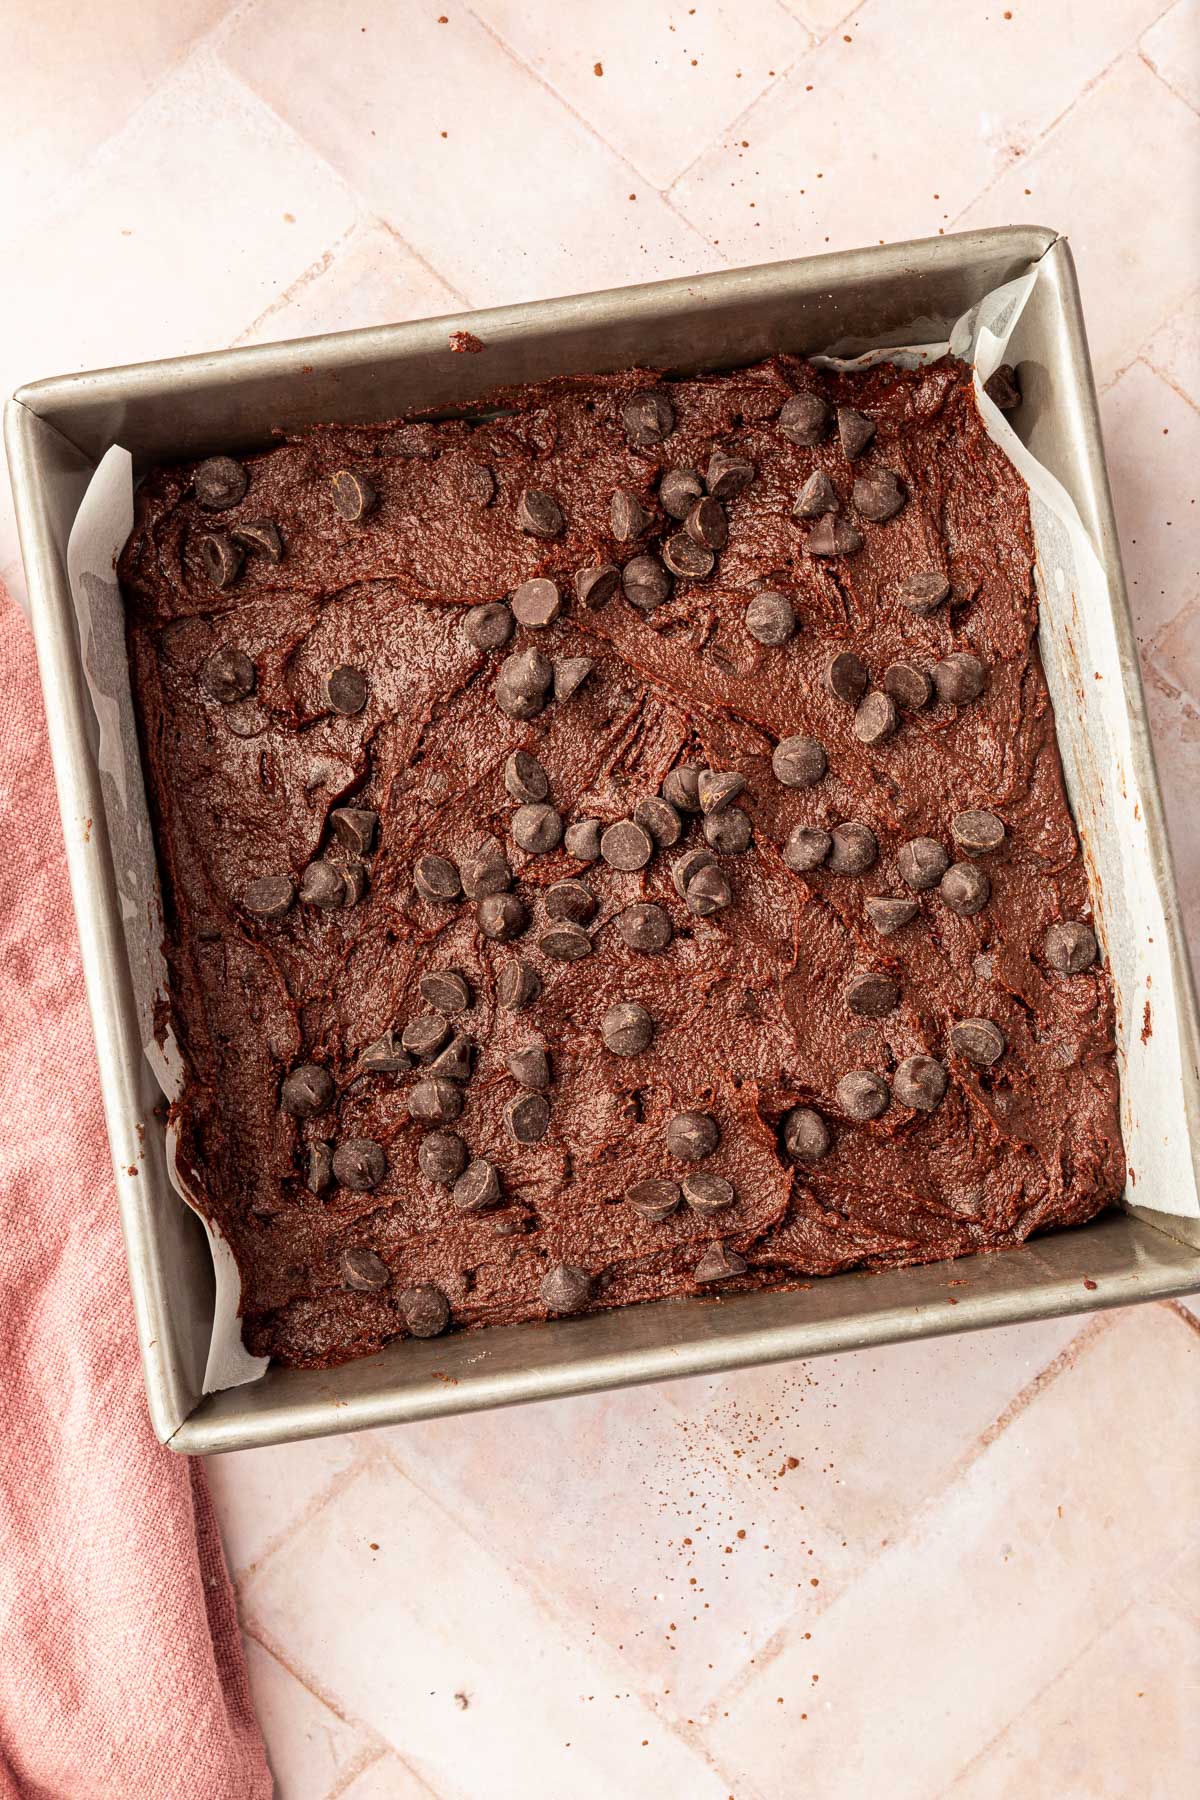 A square baking pan filled with brownie batter and topped with semi-sweet chocolate chips before baking in the oven.